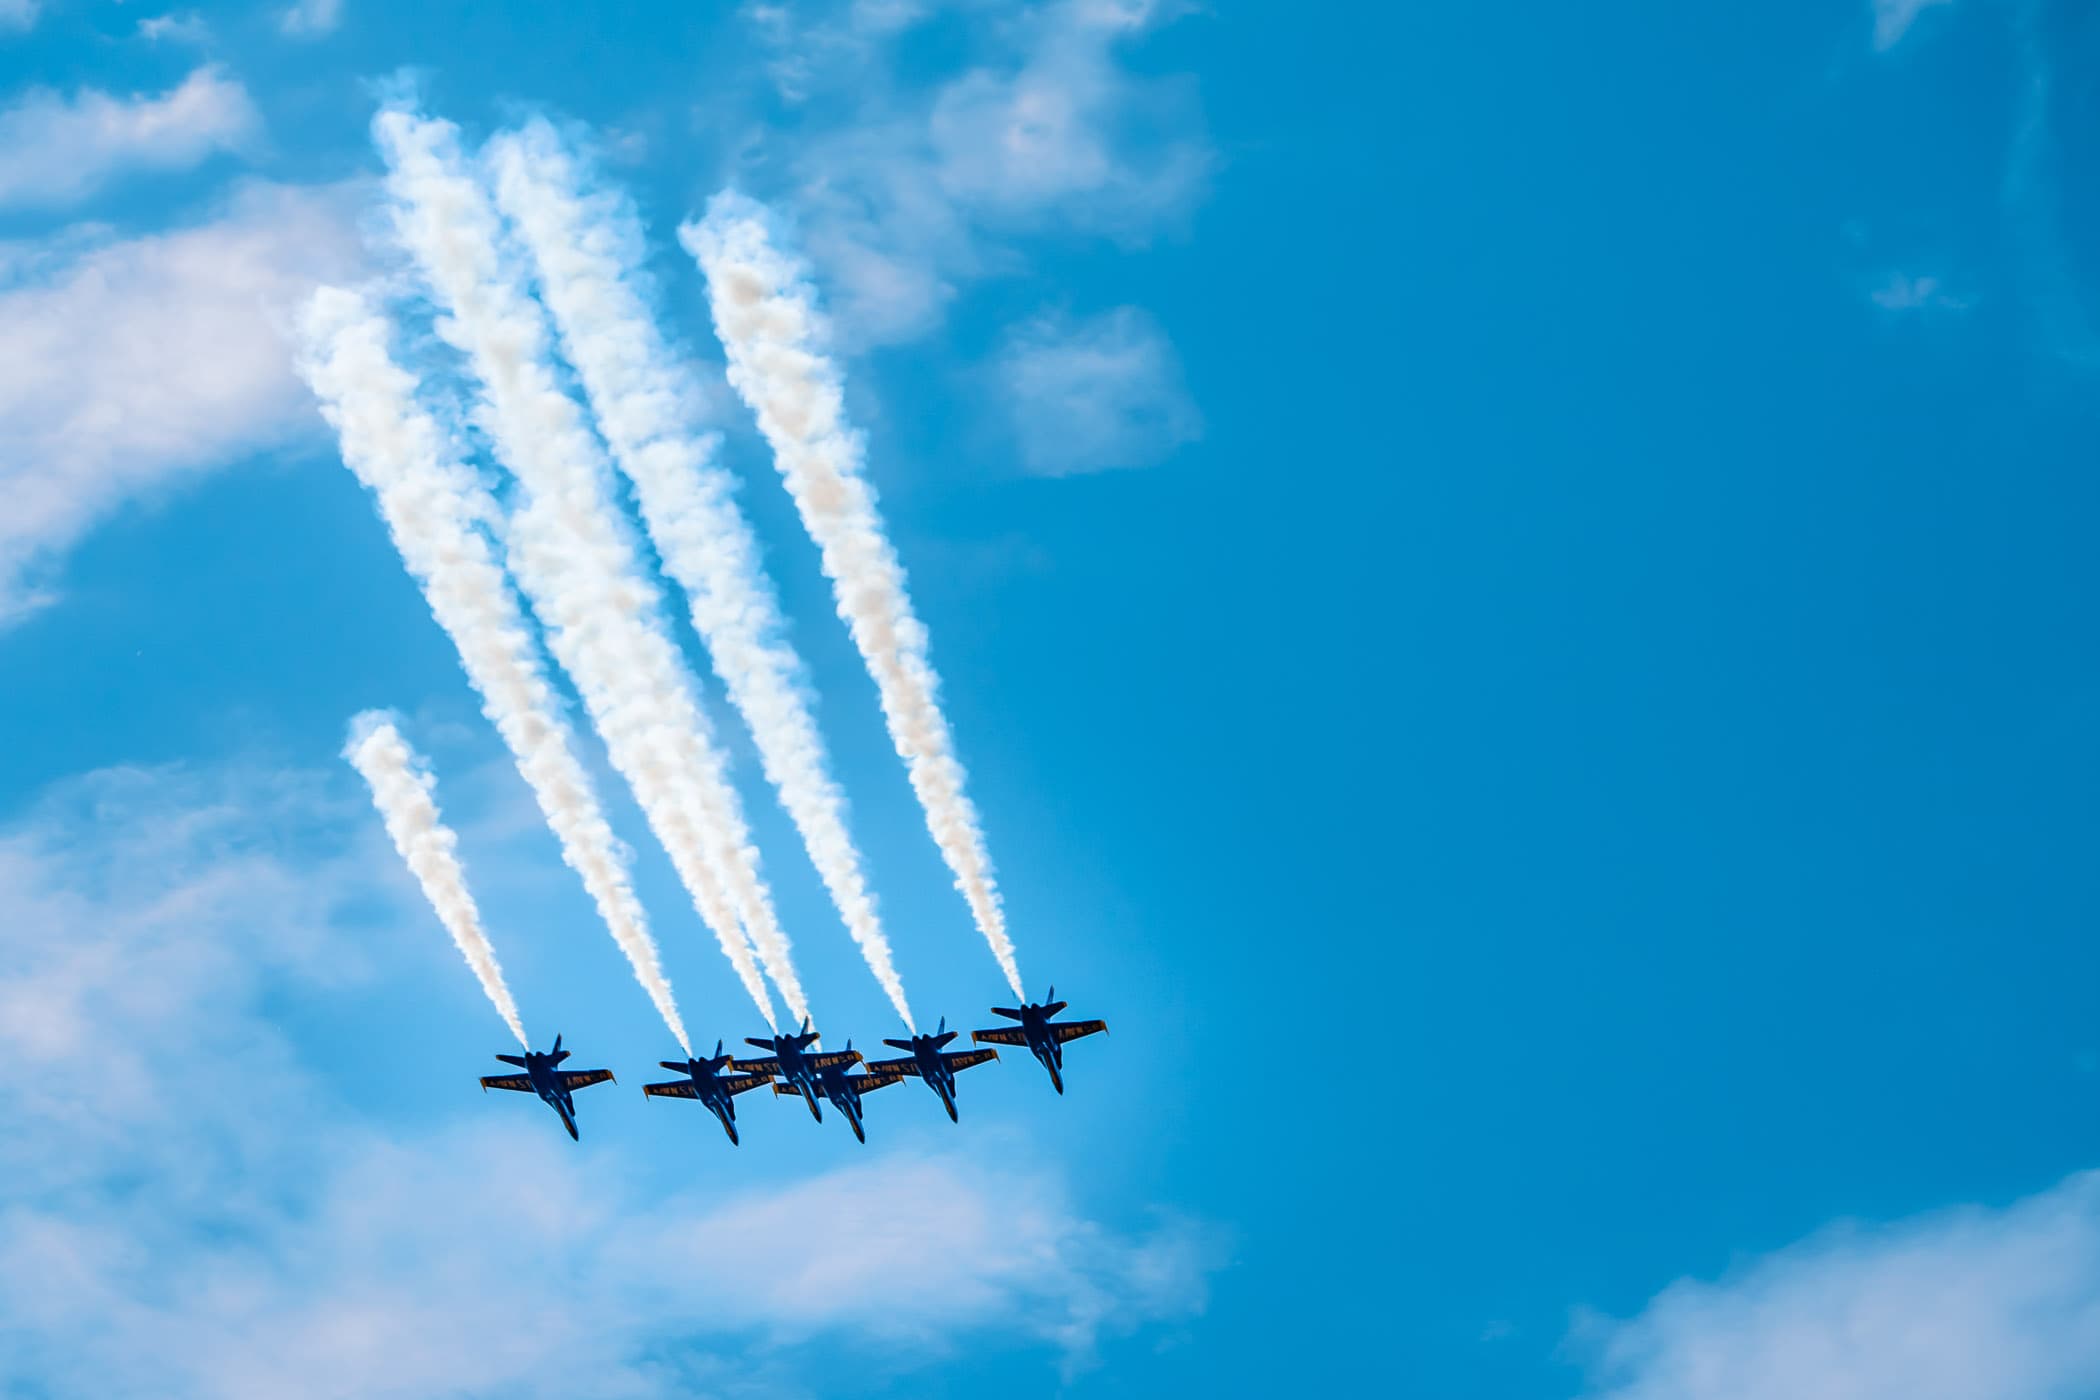 The U.S. Navy's Blue Angels fly over the northern suburbs of the Dallas-Fort Worth Metroplex as part of their salute to frontline workers in the COVID-19 pandemic response.